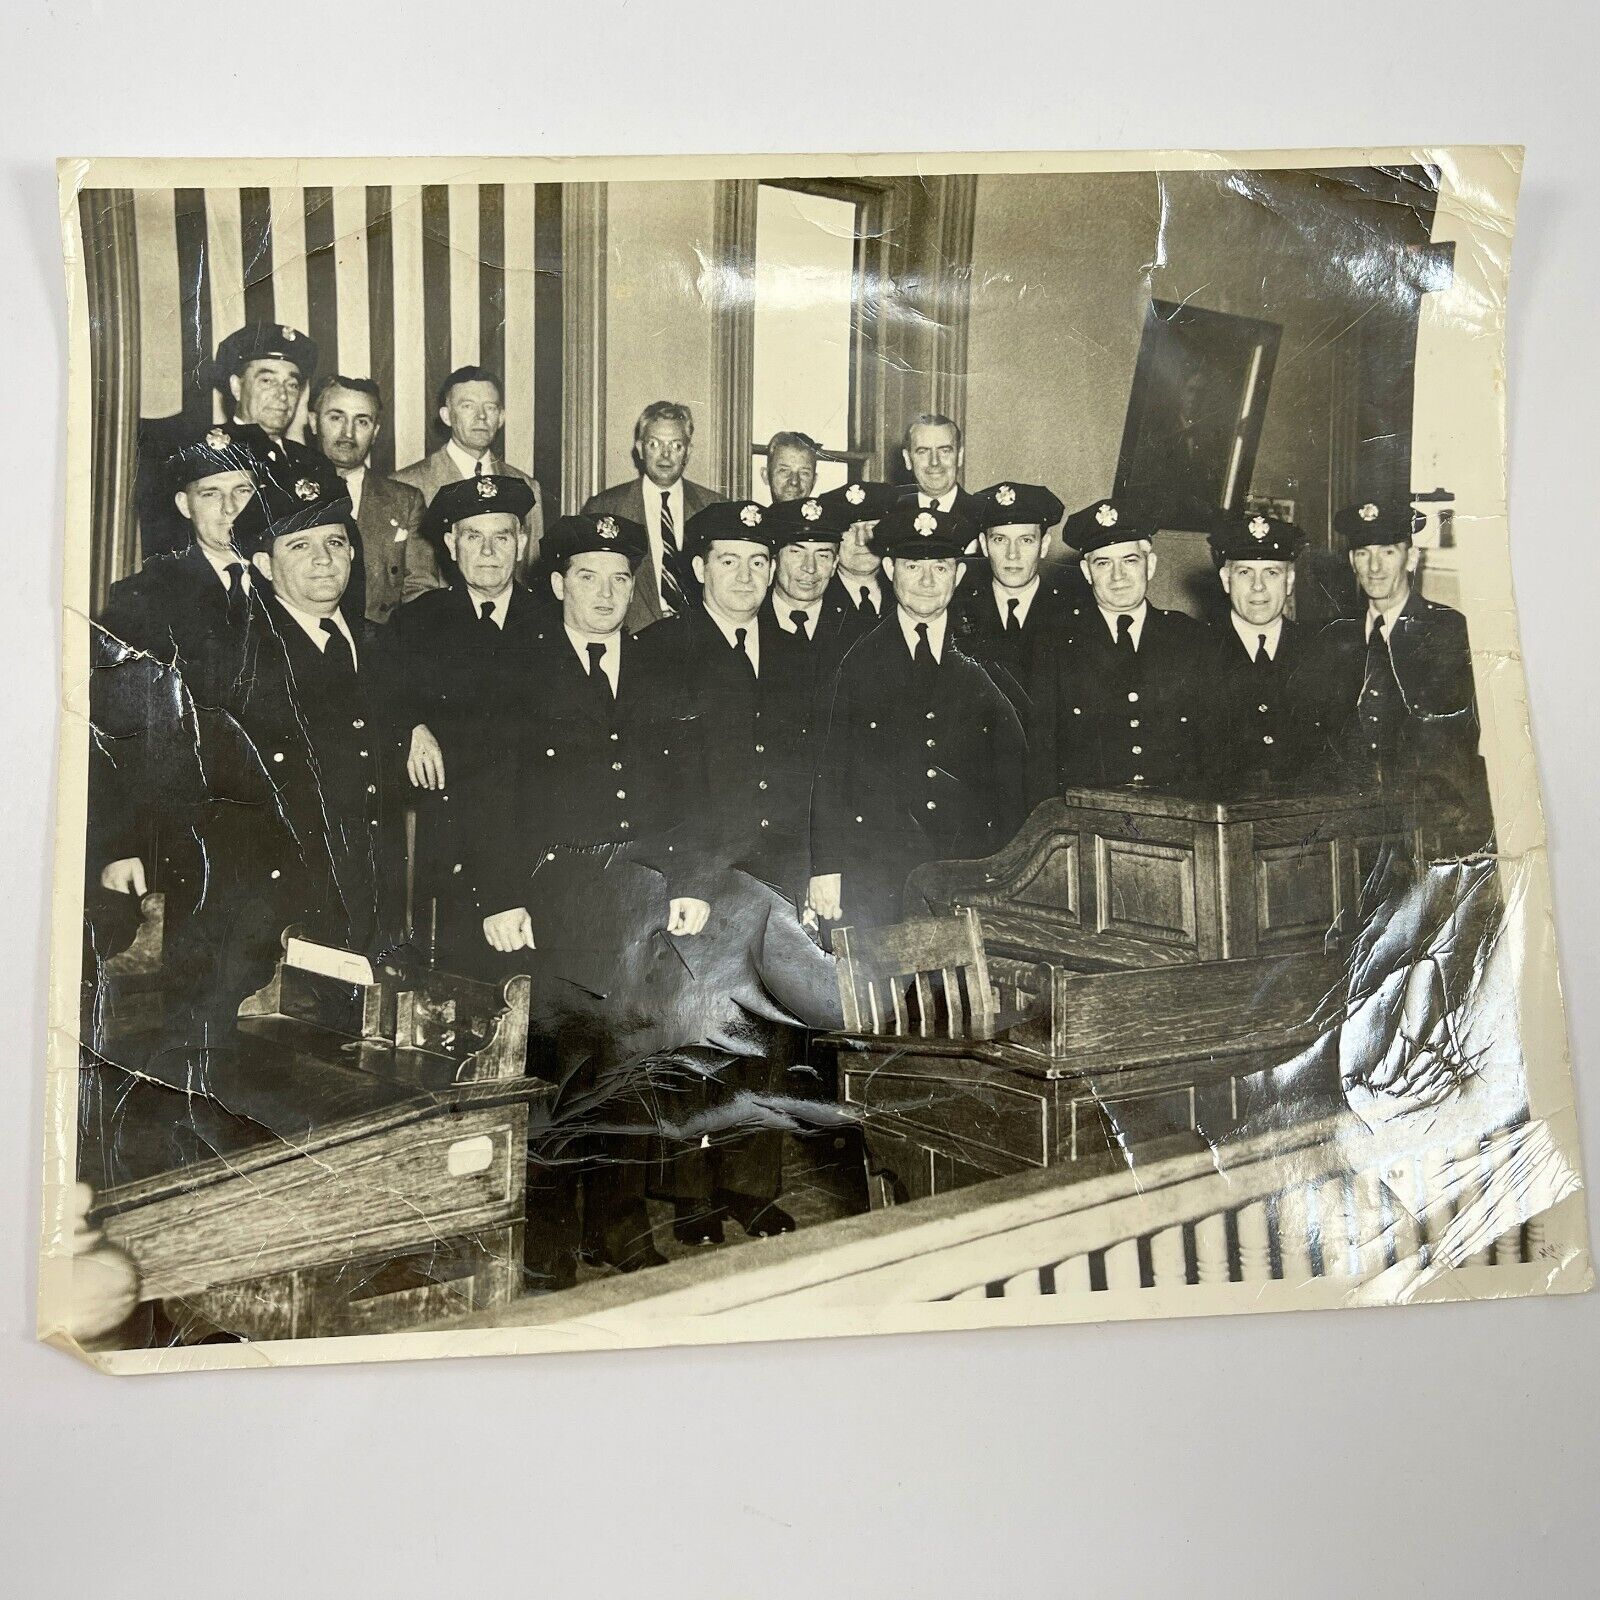 Police Department Police Officer Real Photograph Group Photo 8x10